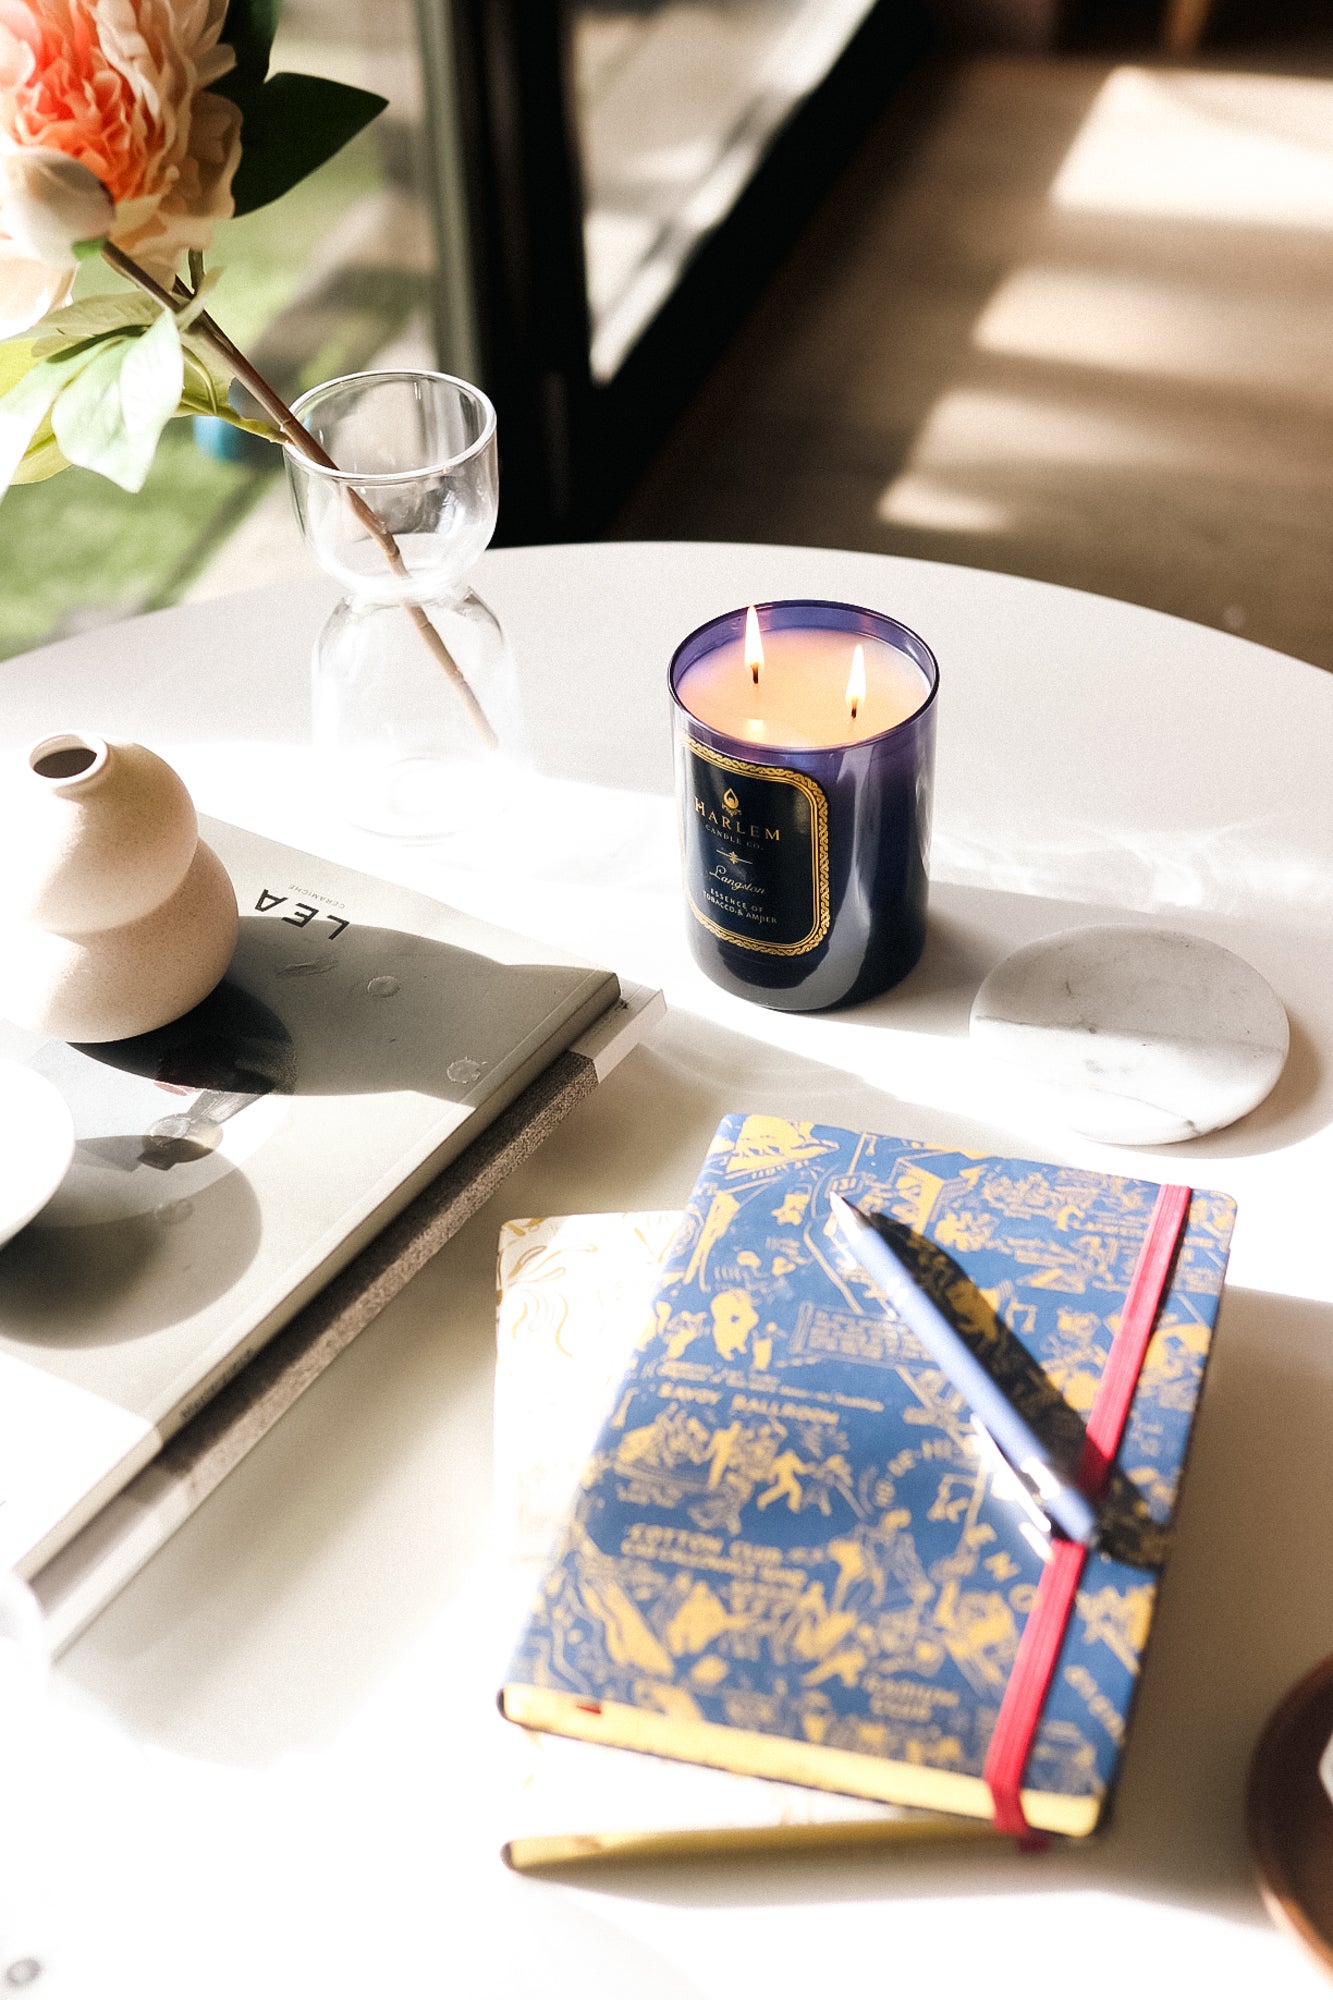 This is an image of our nightclub map of Harlem, navy and gold journal pictured next to our Langston candle